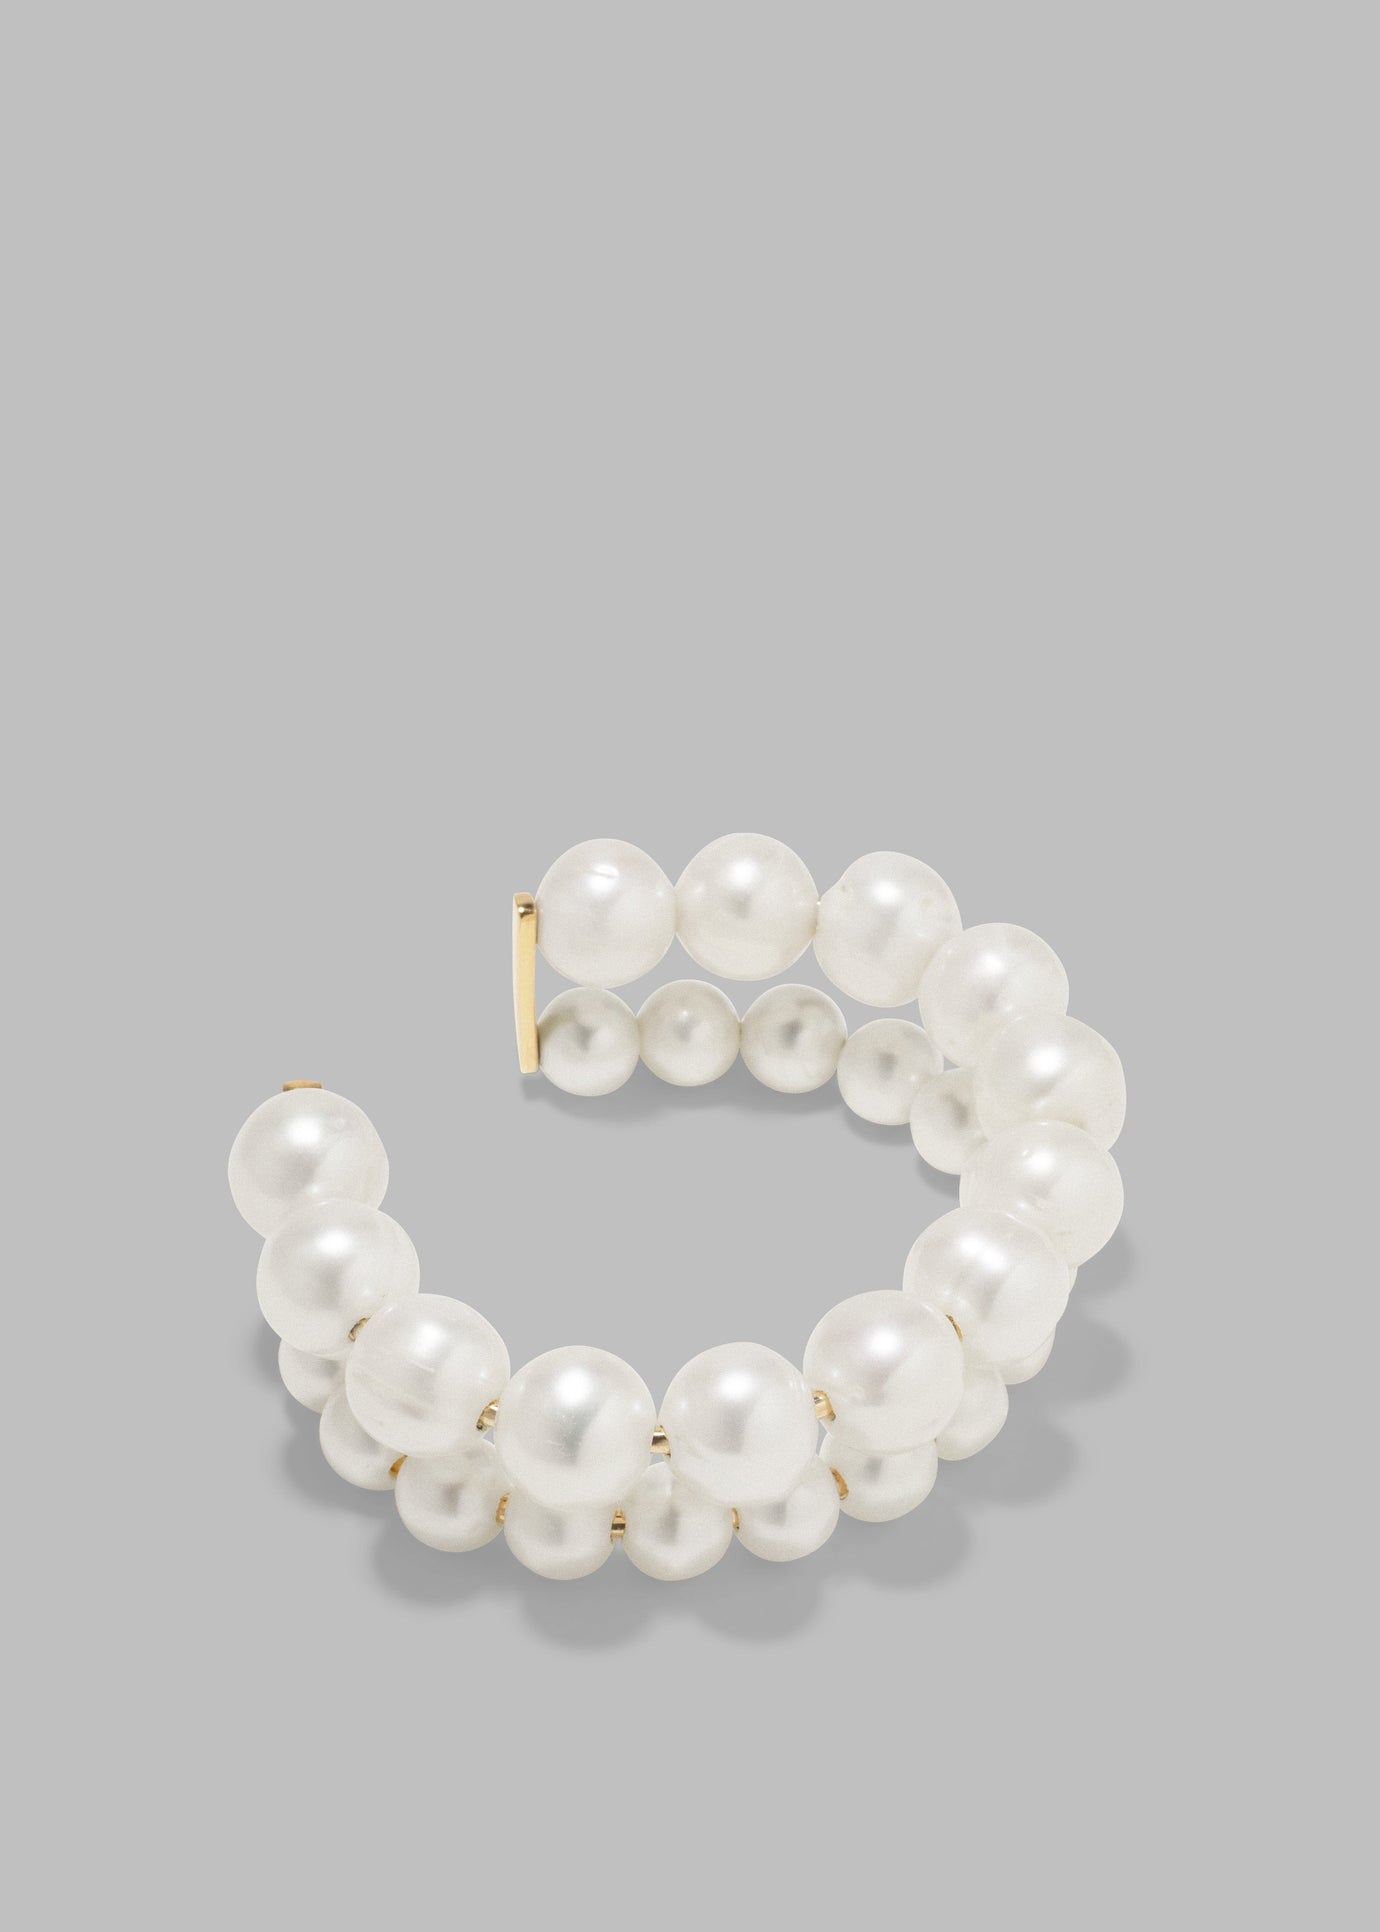 Completedworks One (Blank) Can Change the World Bracelet Cuff - Pearl/Gold Vermeil - 1